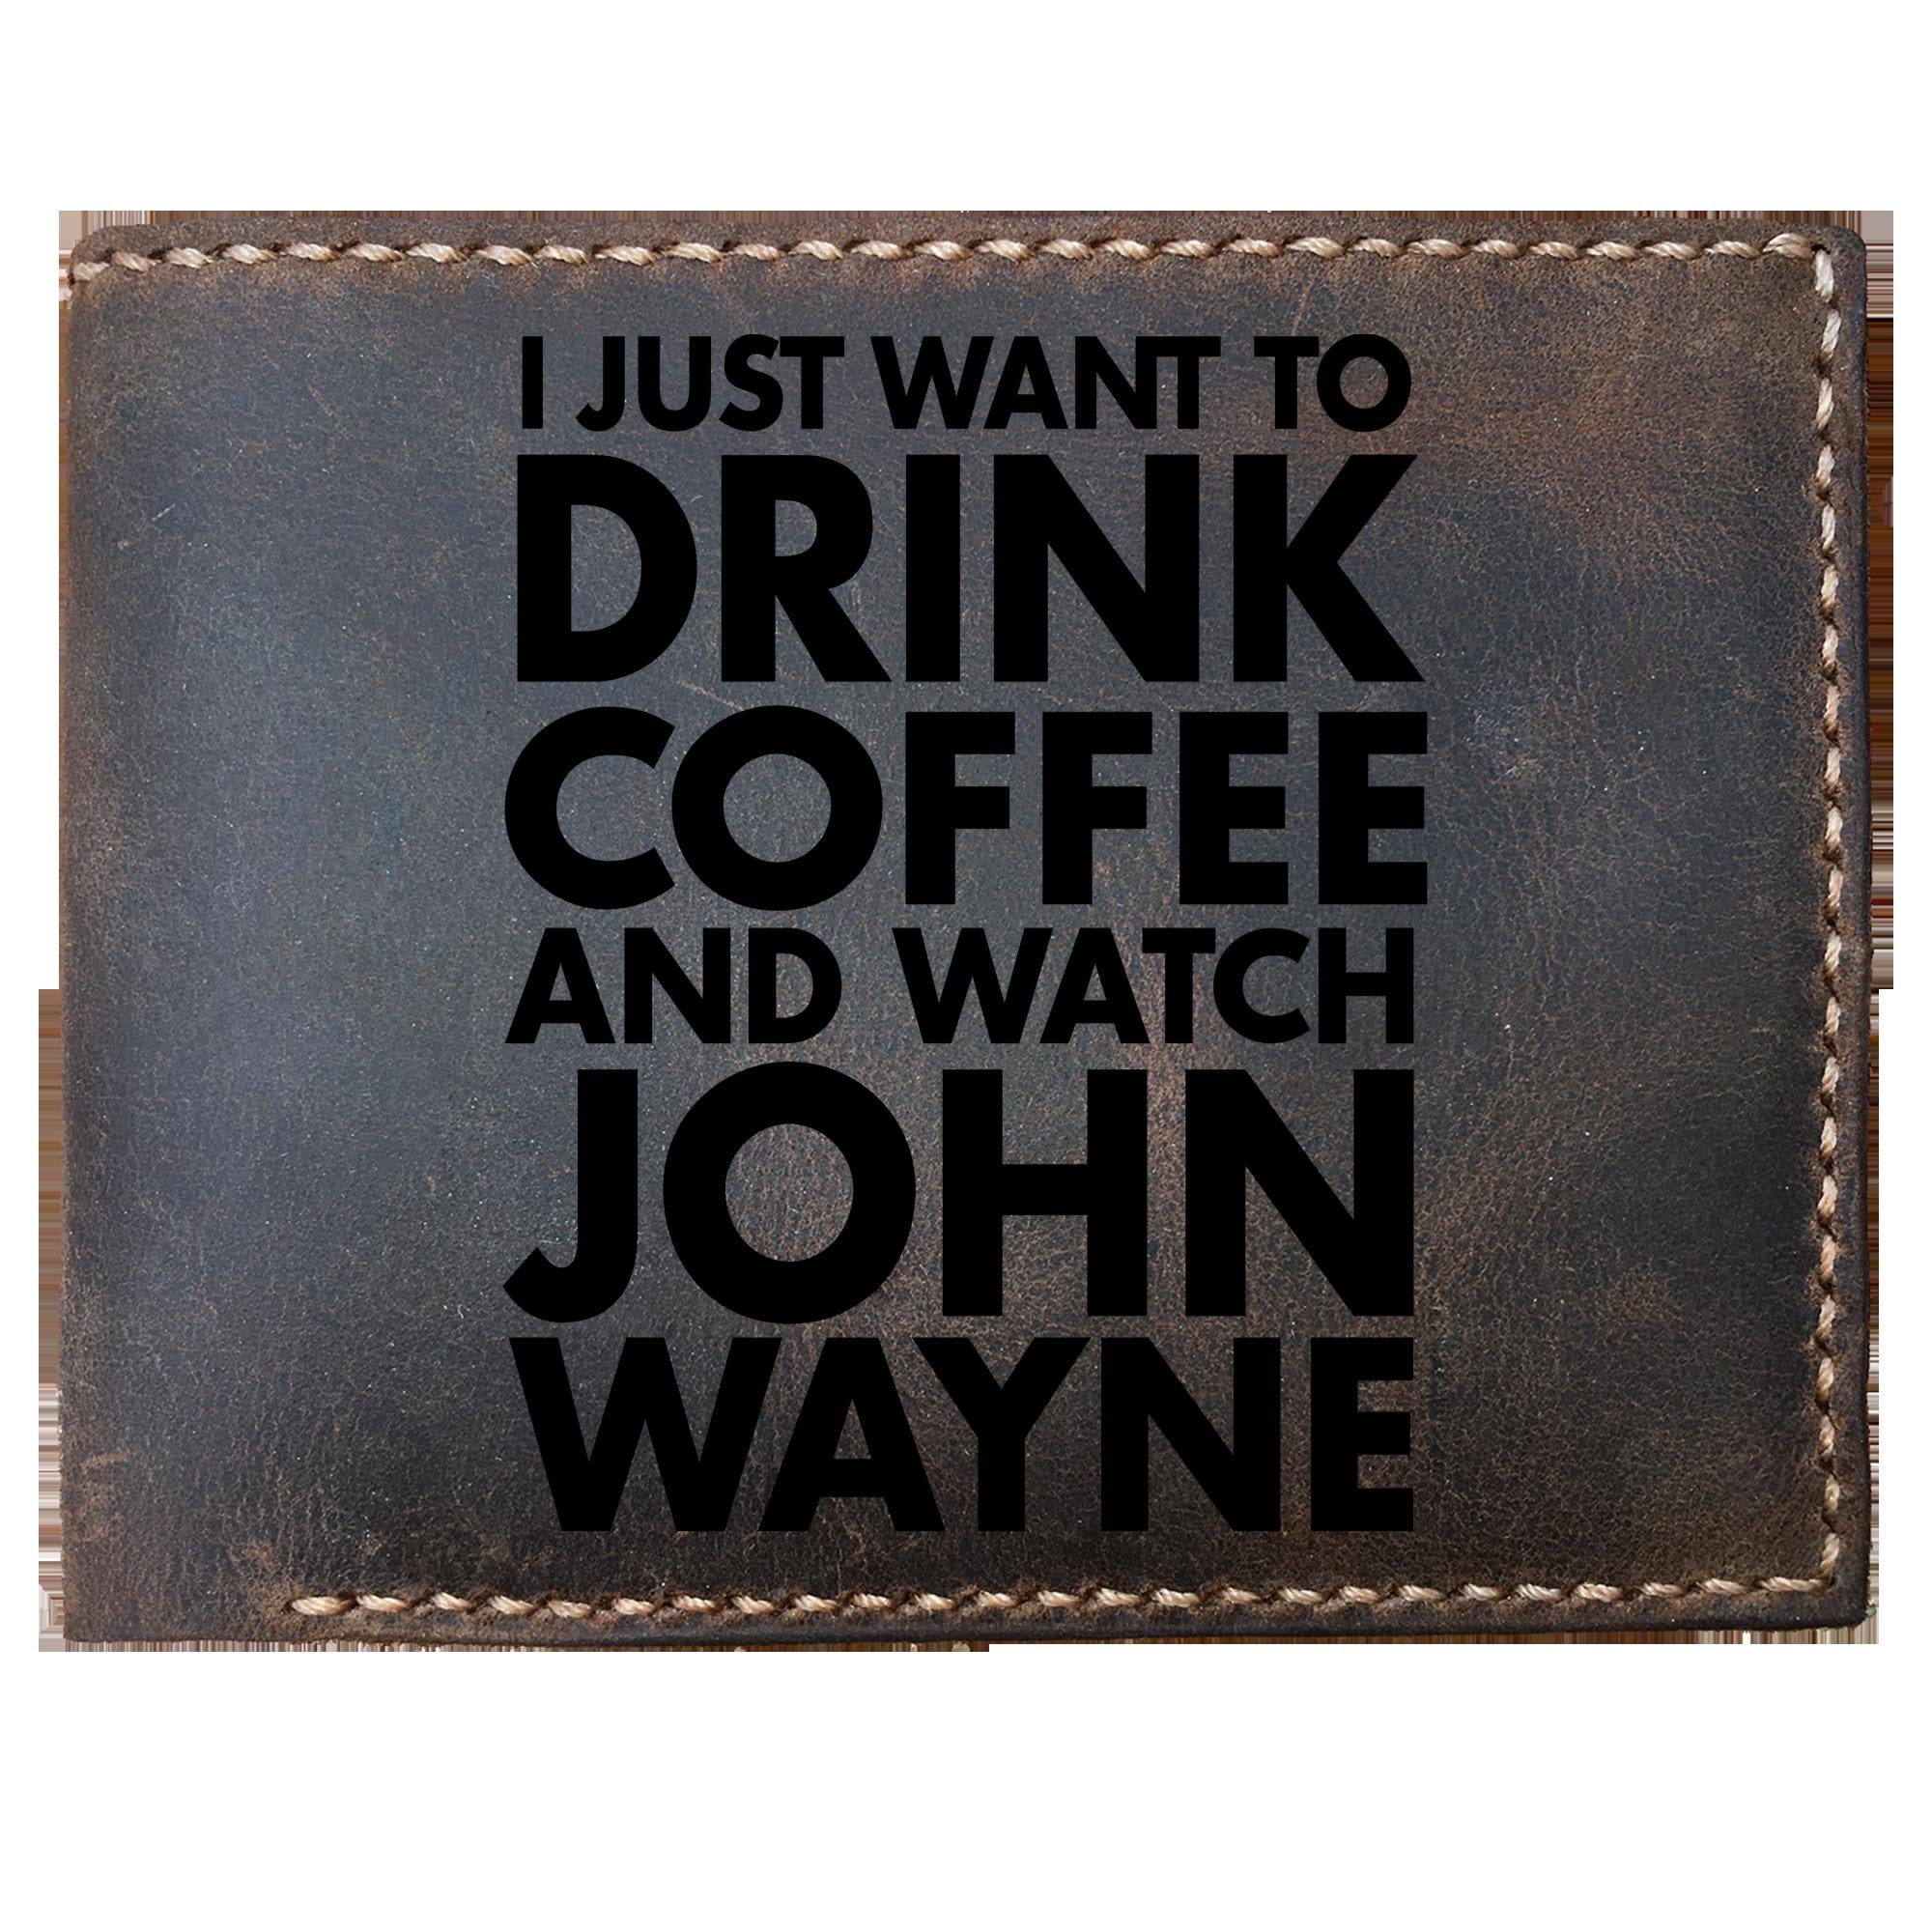 I Just Want To Drink Coffee And Watch John Wayne Funny Skitongifts Custom Laser Engraved Bifold Leather Wallet Vintage